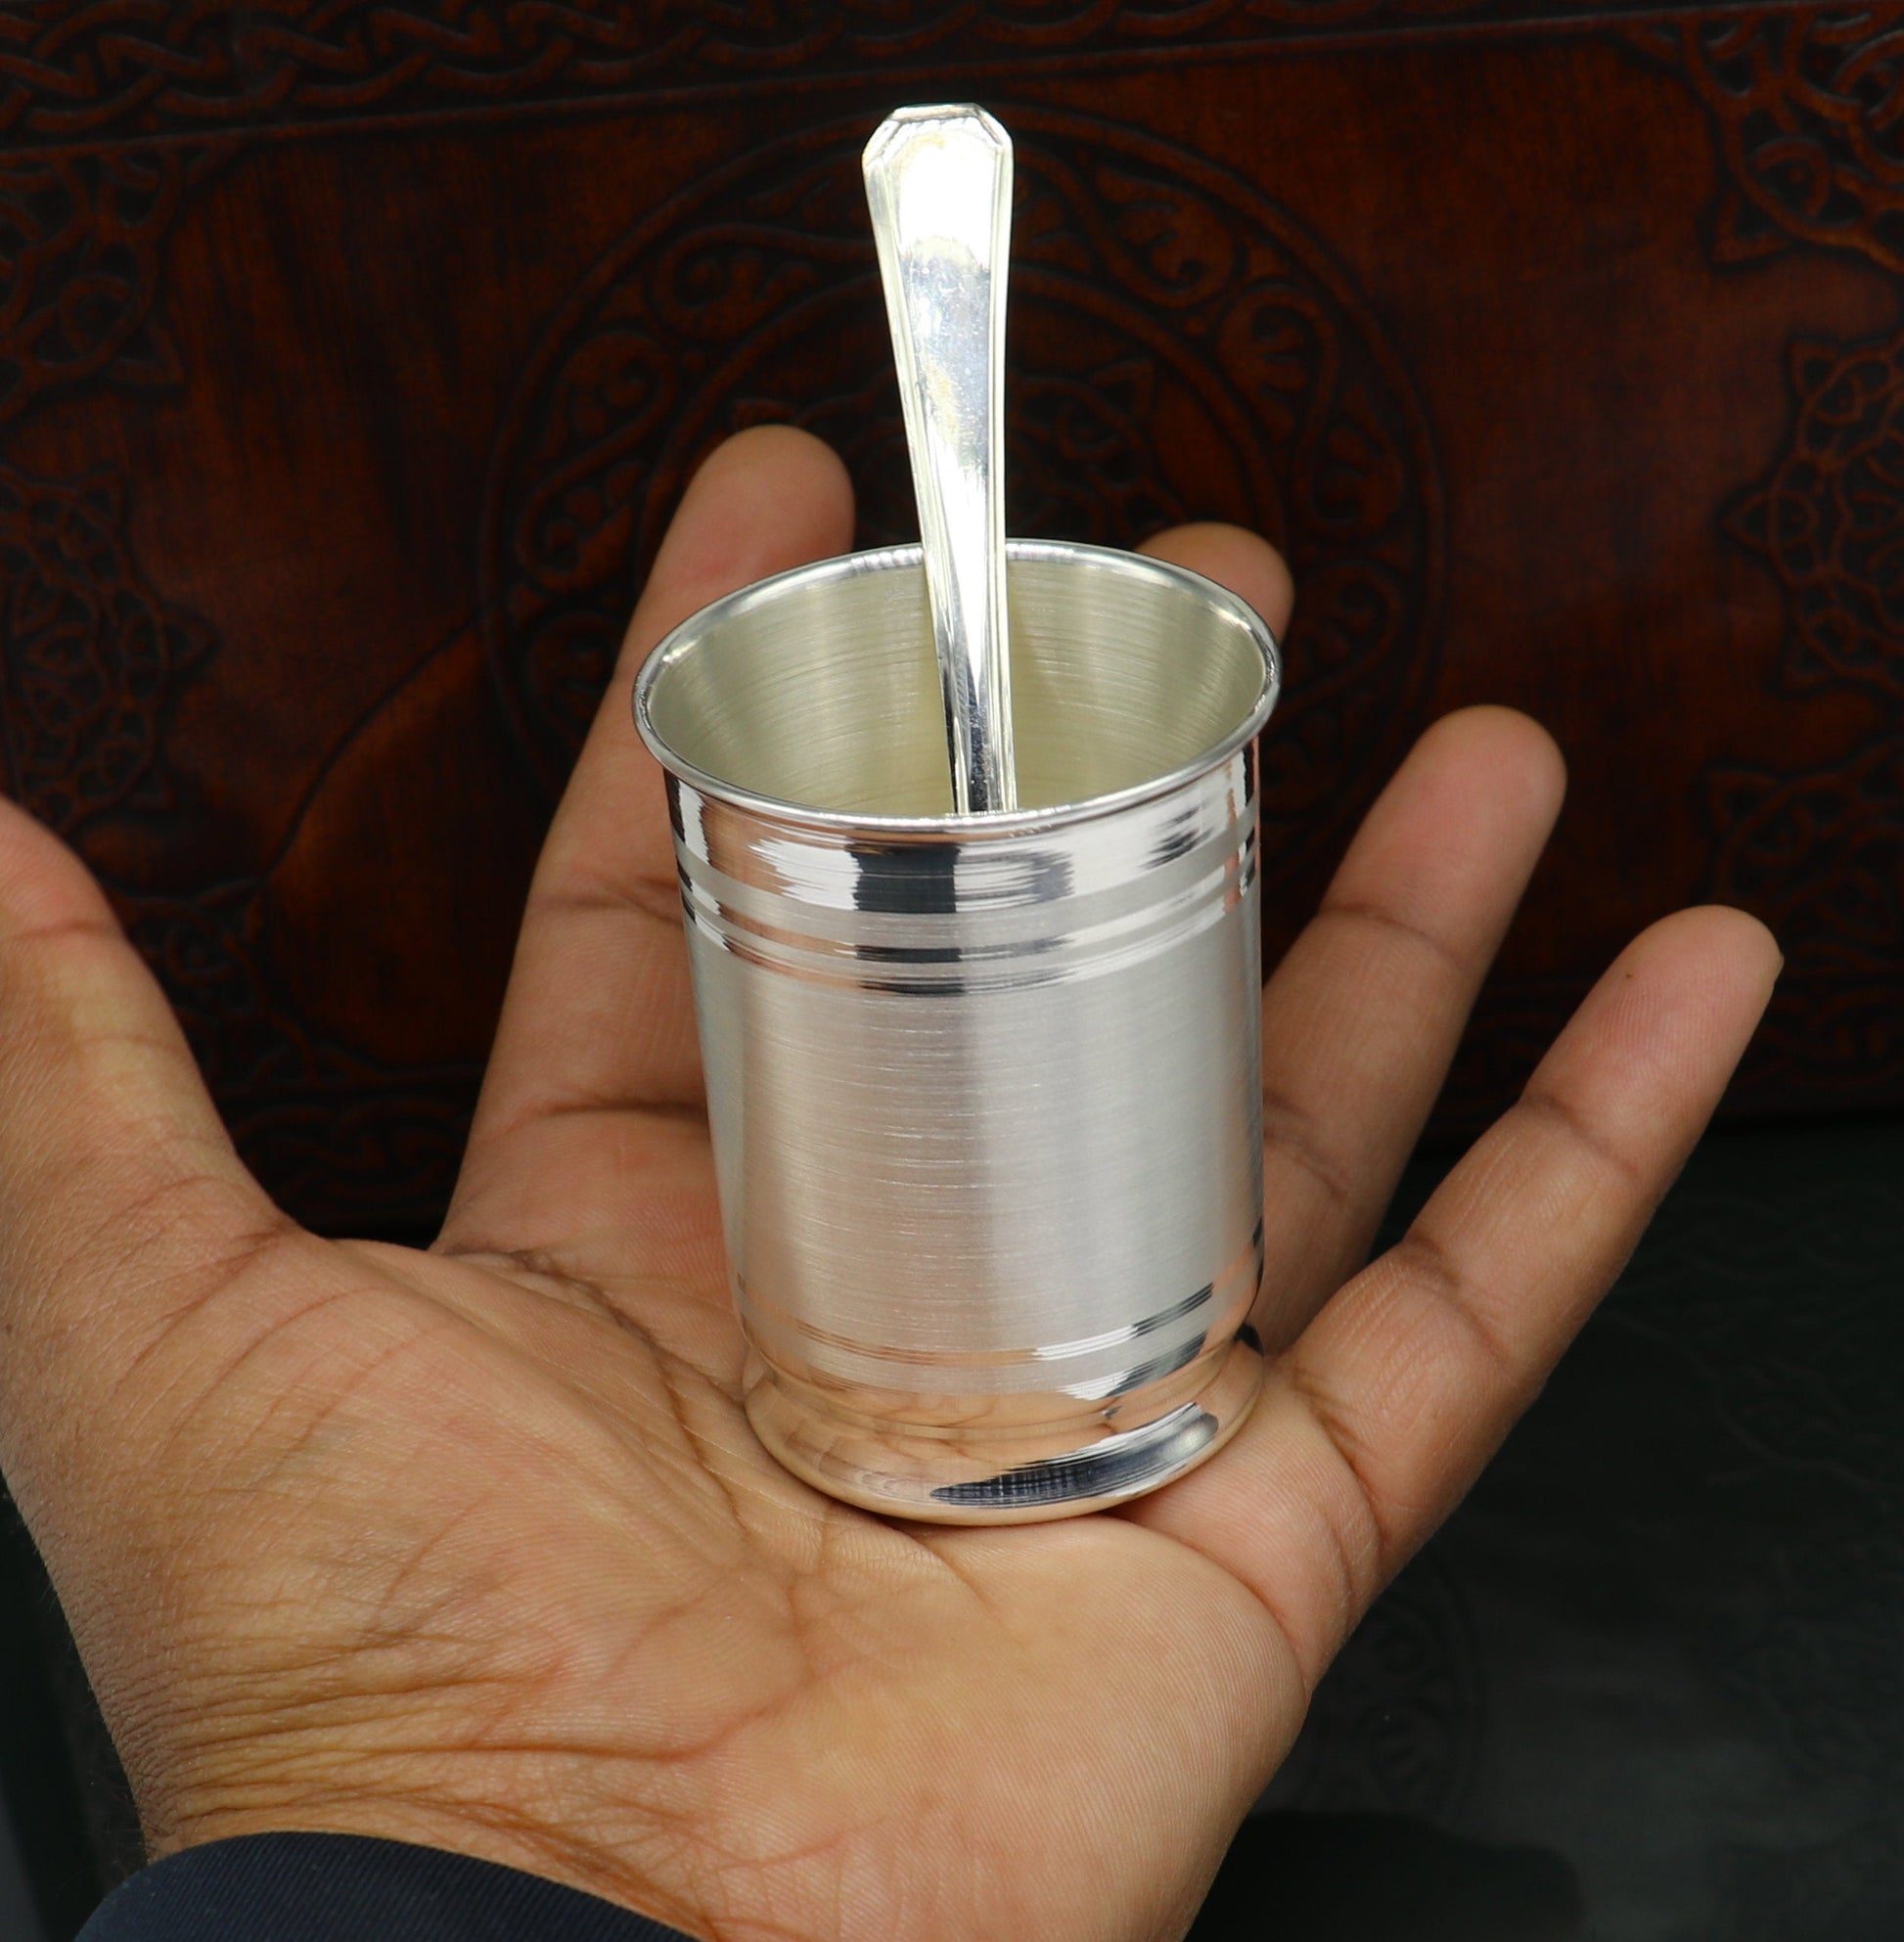 999 pure silver Water/milk tumbler, silver vessel, silver baby set utensils, silver puja article, puja gifting utensils from india sv111 - TRIBAL ORNAMENTS